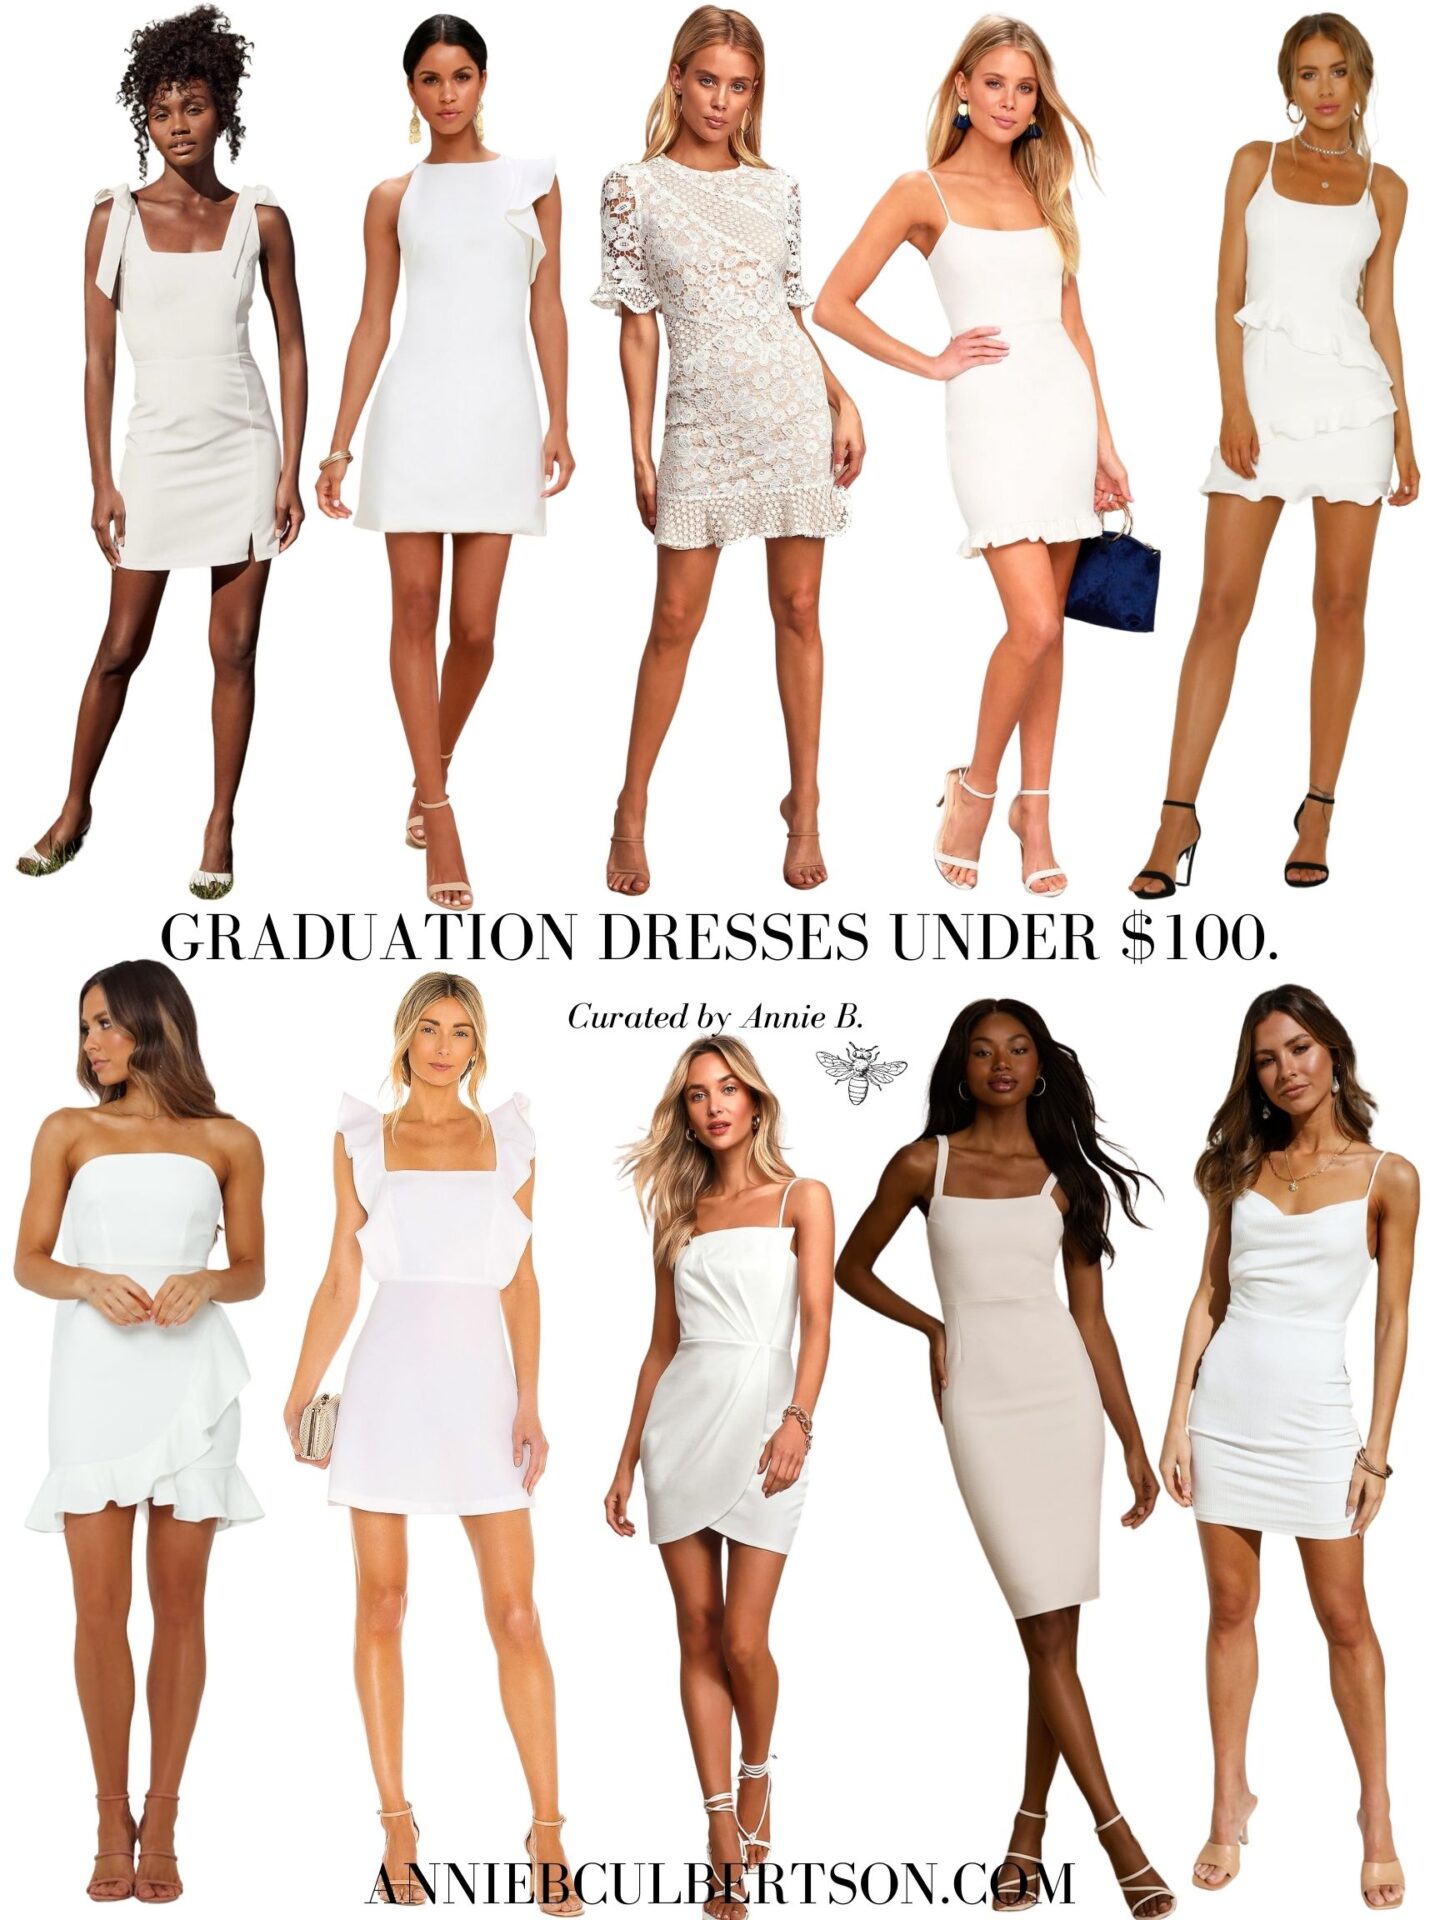 White Graduation Dresses at Different Price Points